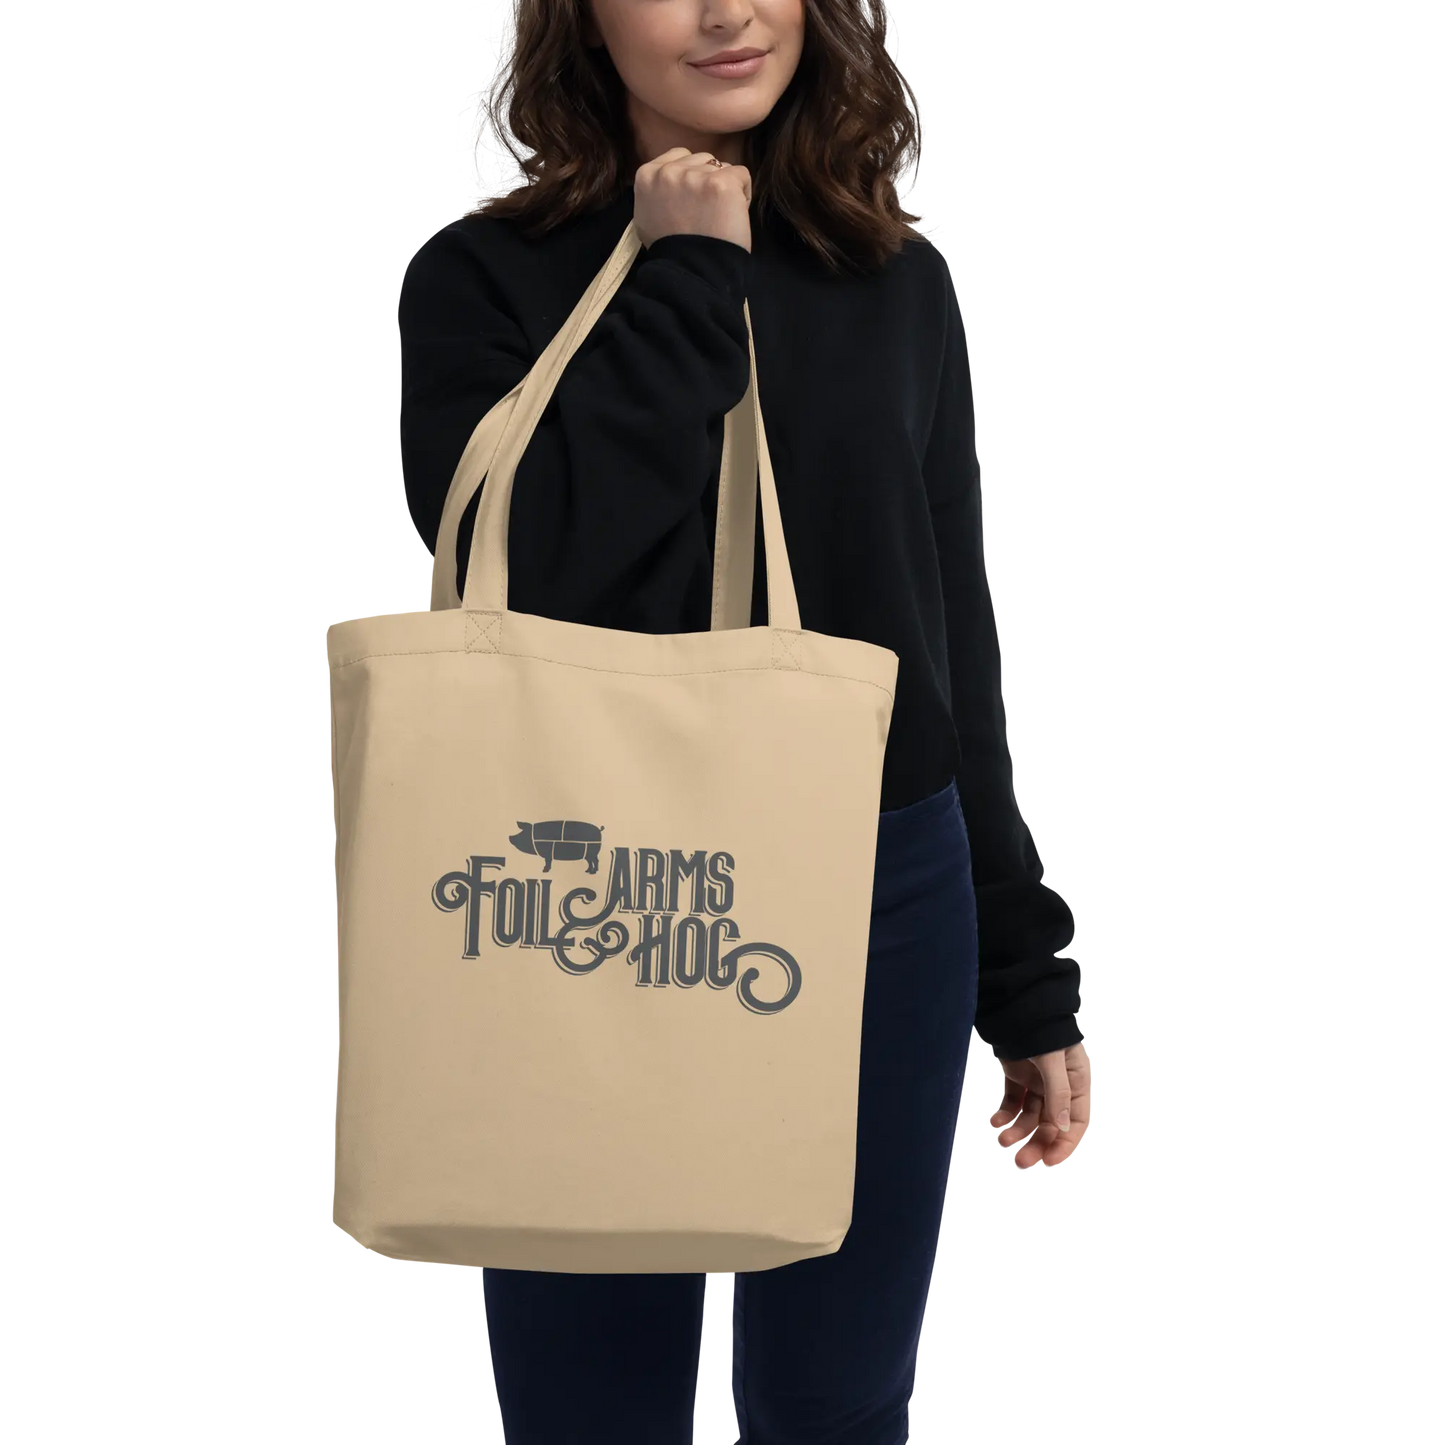 Foil Arms and Hog merchandise beige tote shopping bag with big logo design